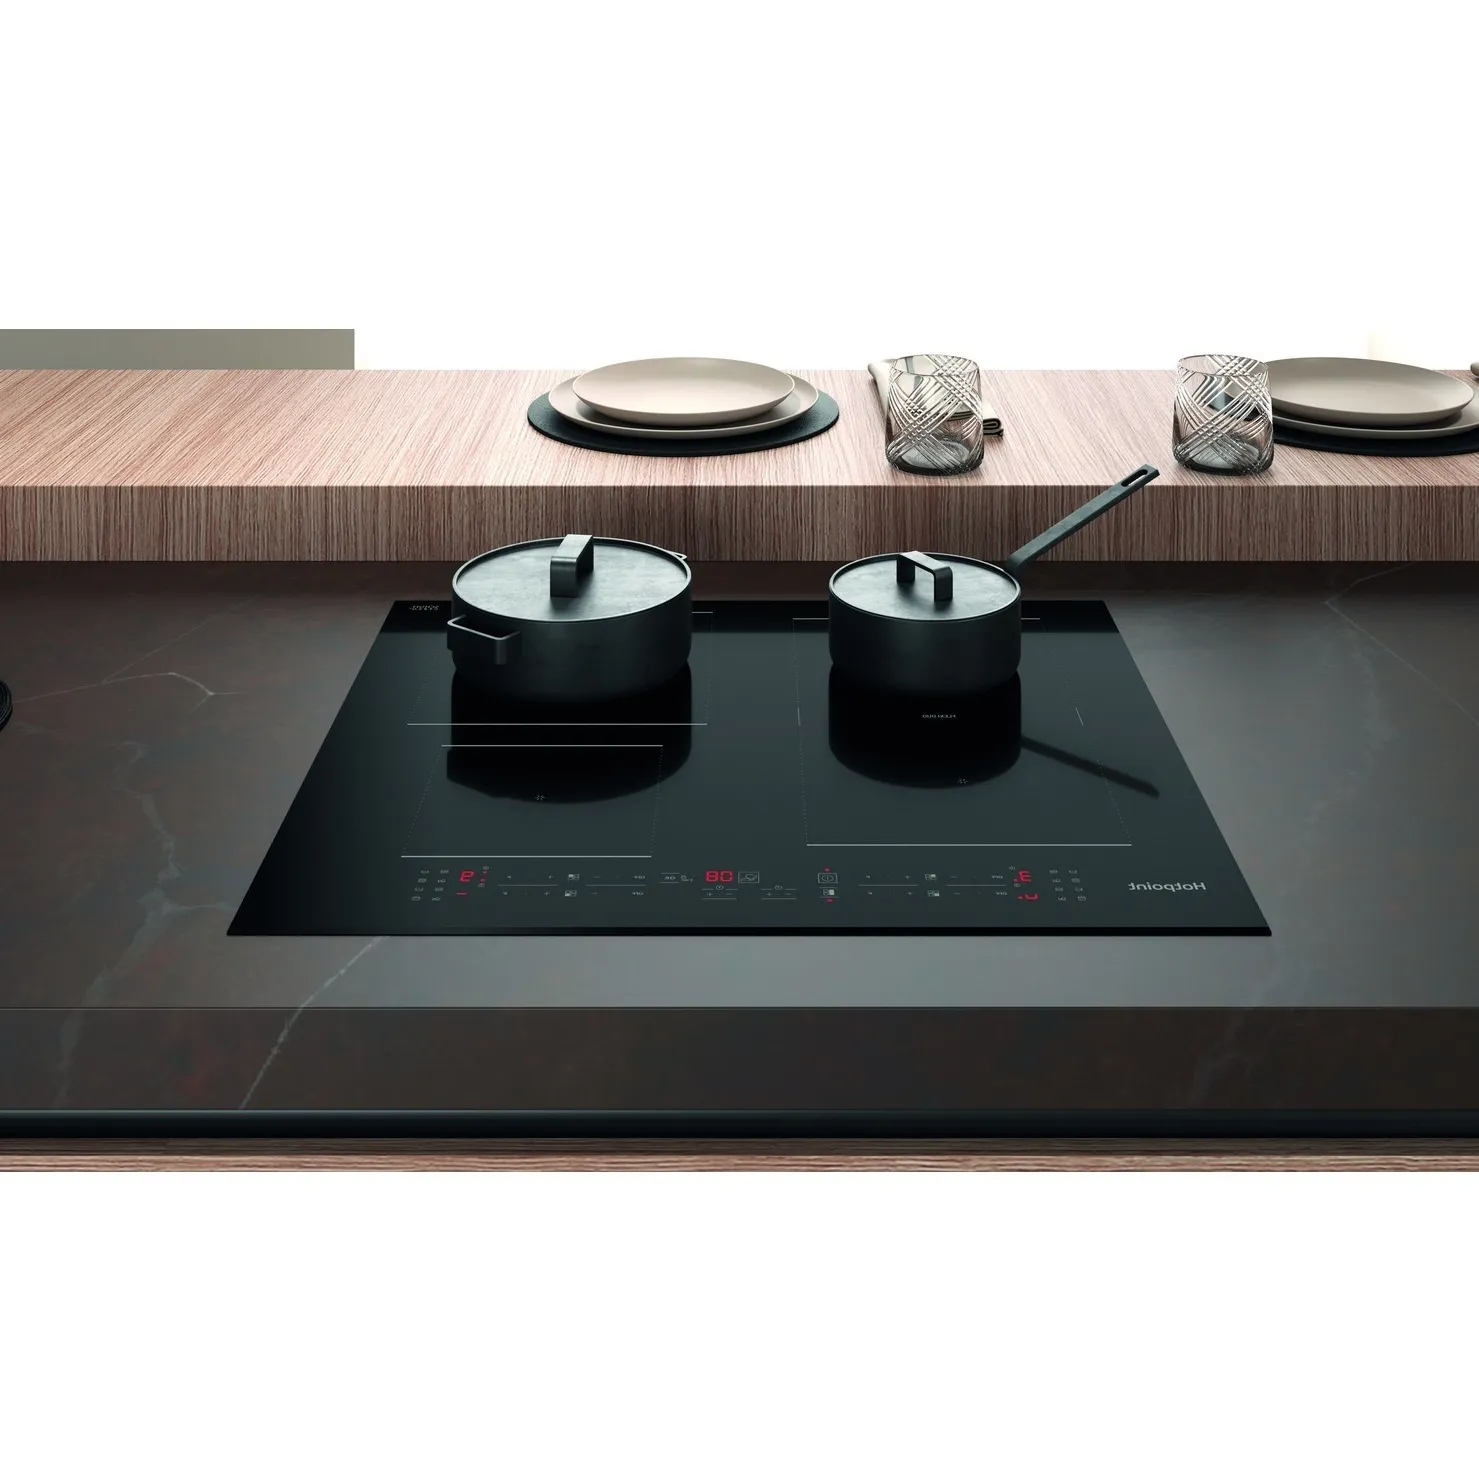 Free Hotpoint Built-in Induction Hob